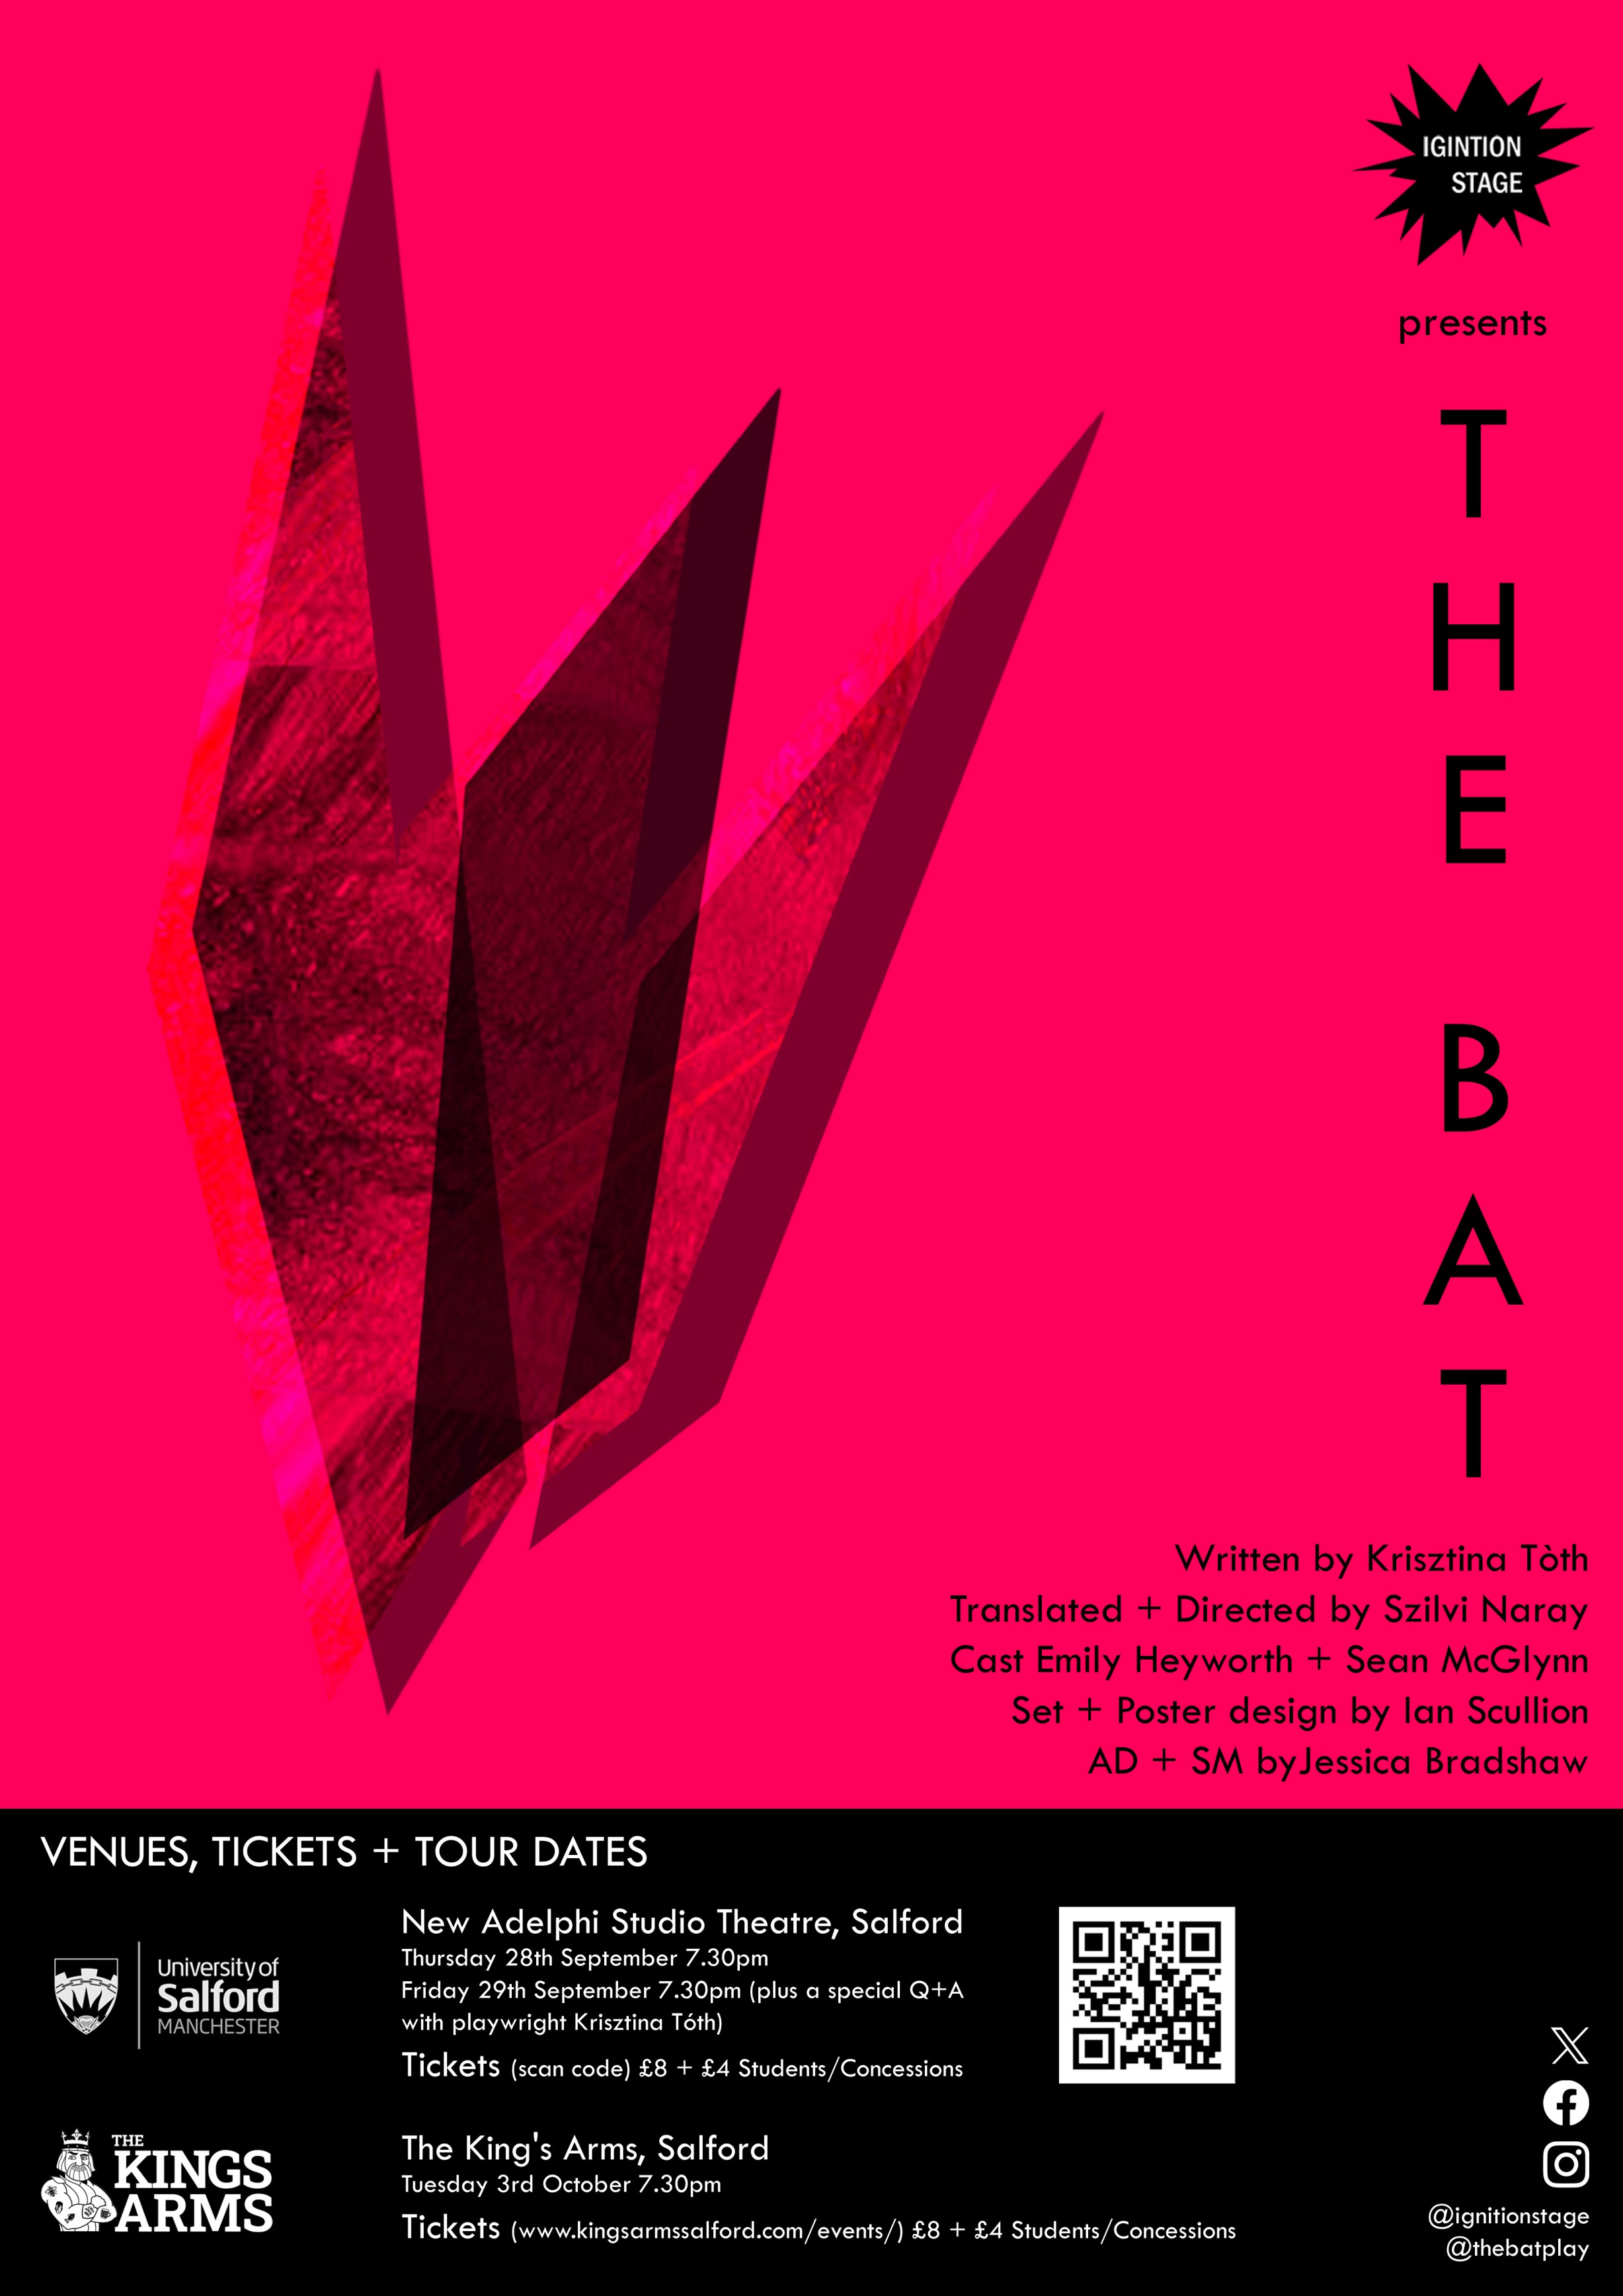 Poster for The Bat